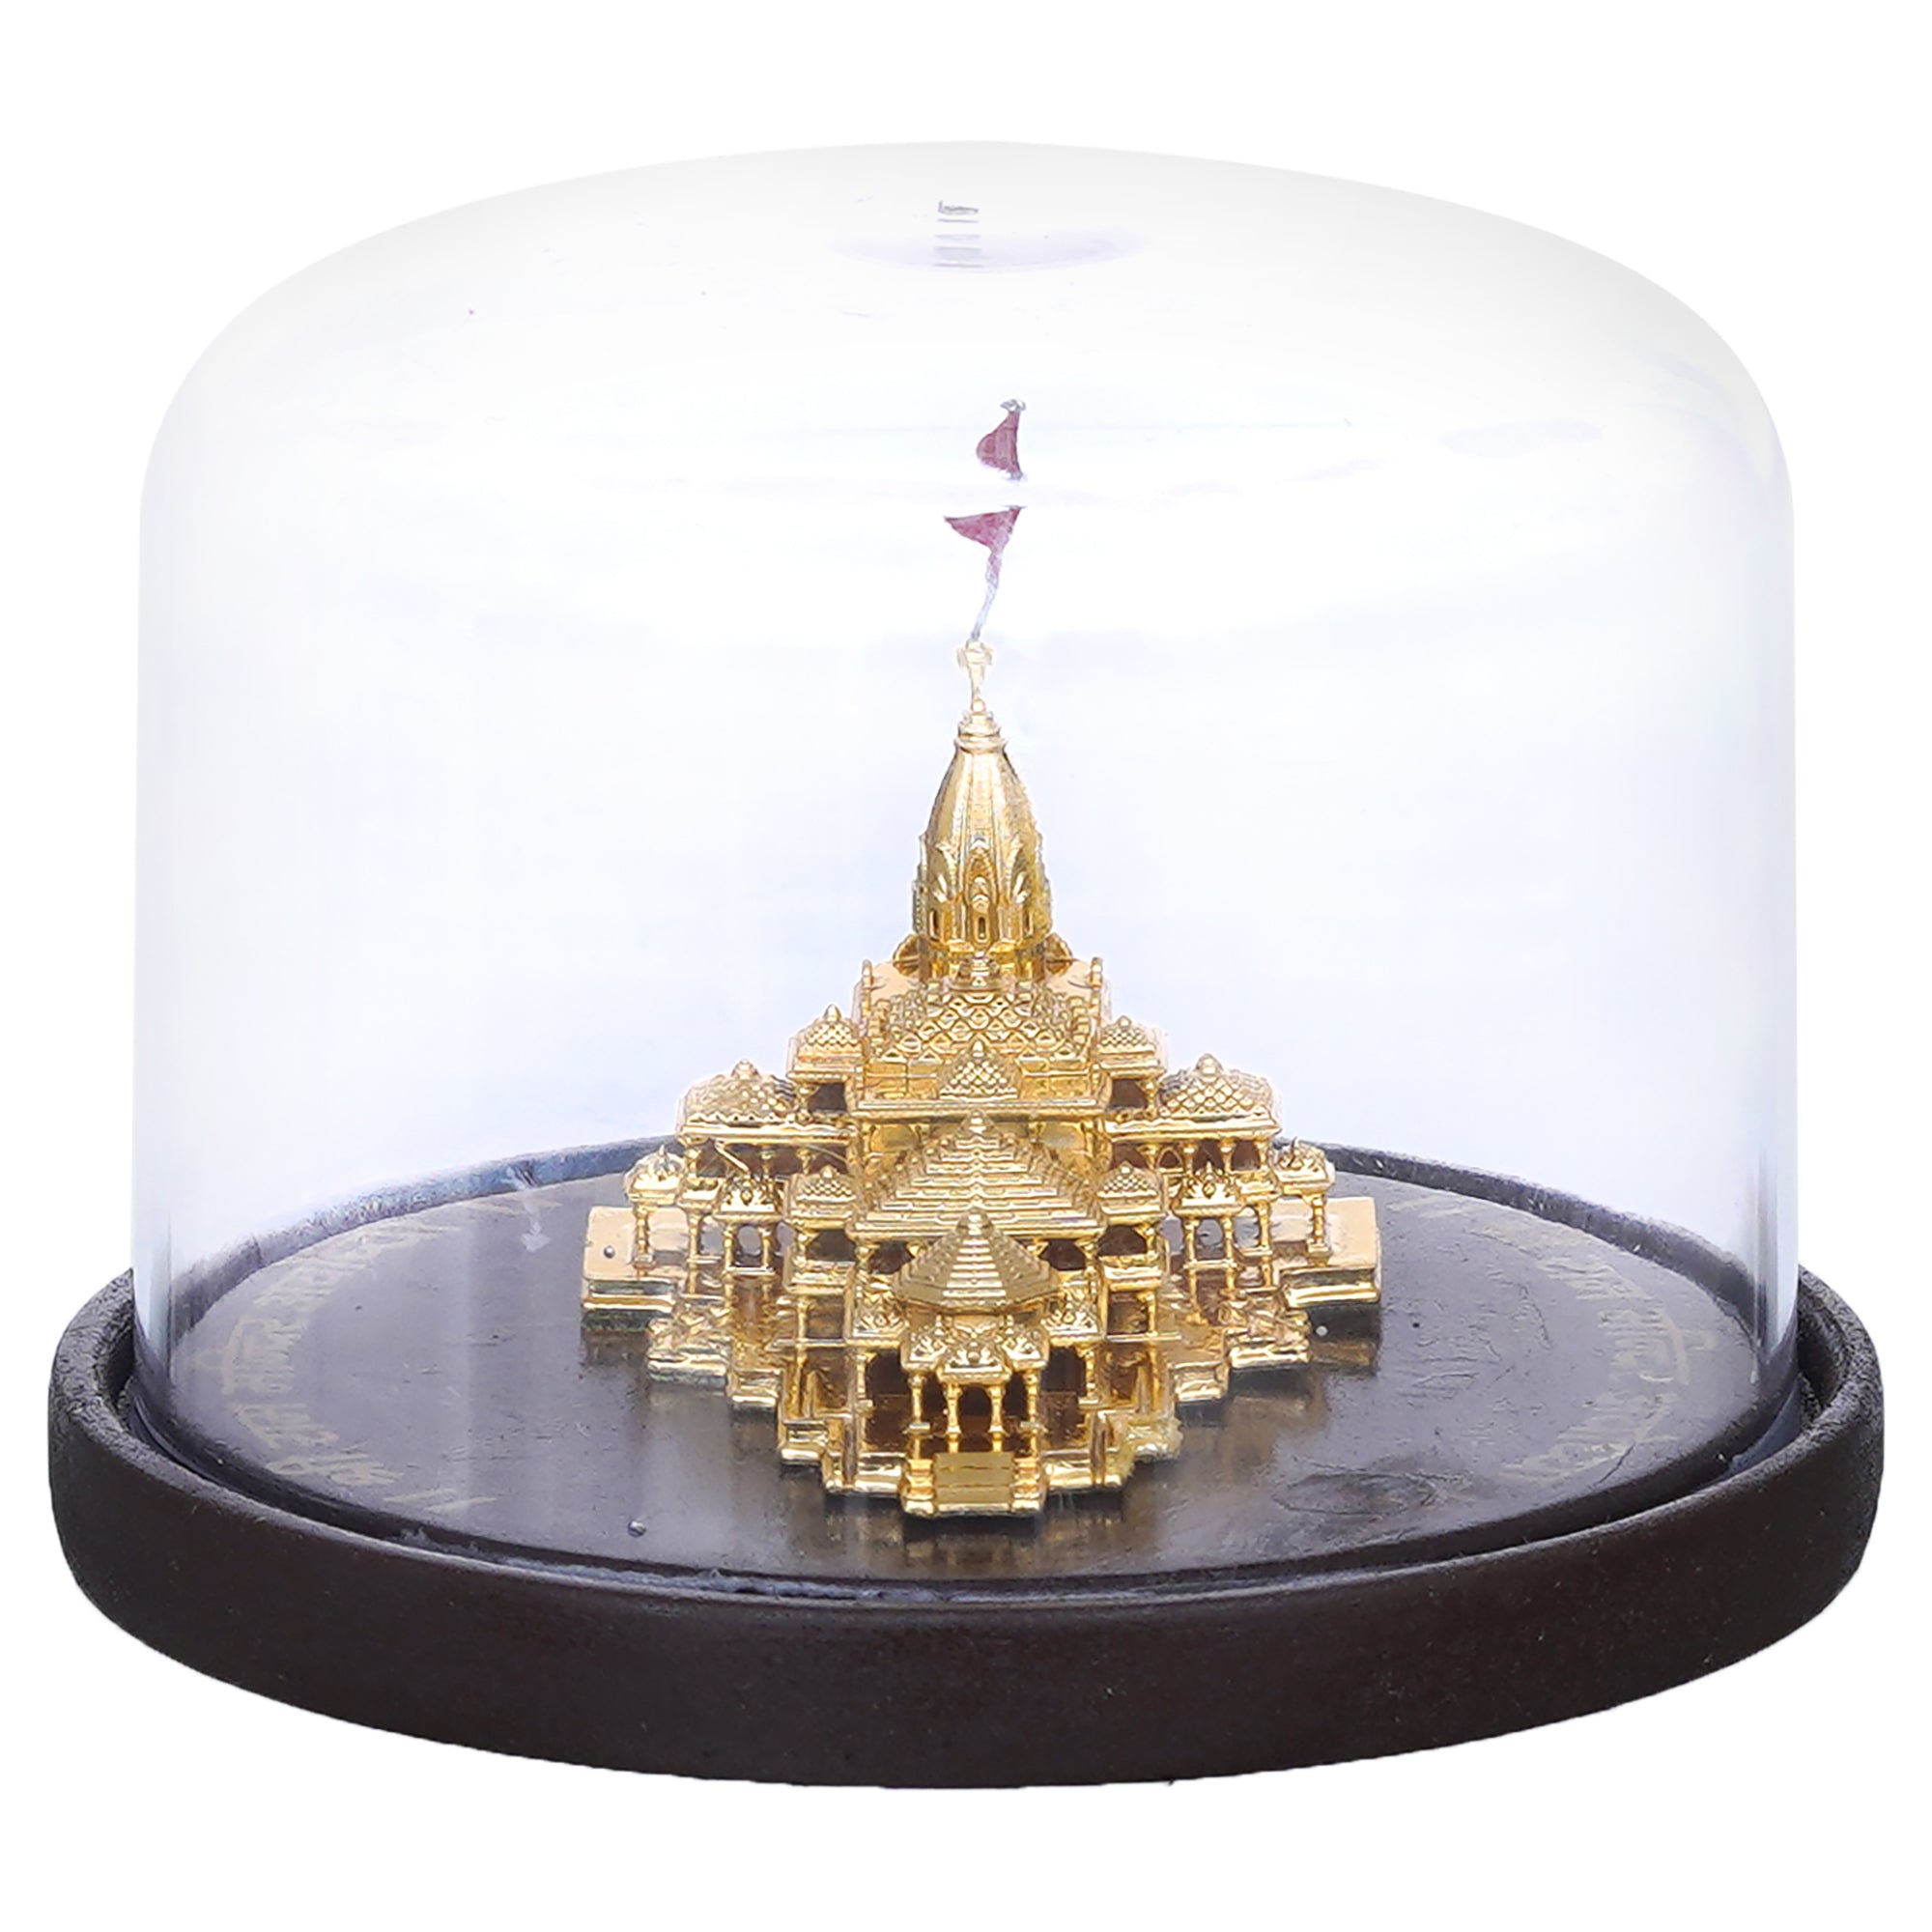 eCraftIndia Golden Shri Ram Mandir Ayodhya Model Authentic Designer Temple Covered by a Glass Dome - Perfect for Home Decor, and Spiritual Gifting 7